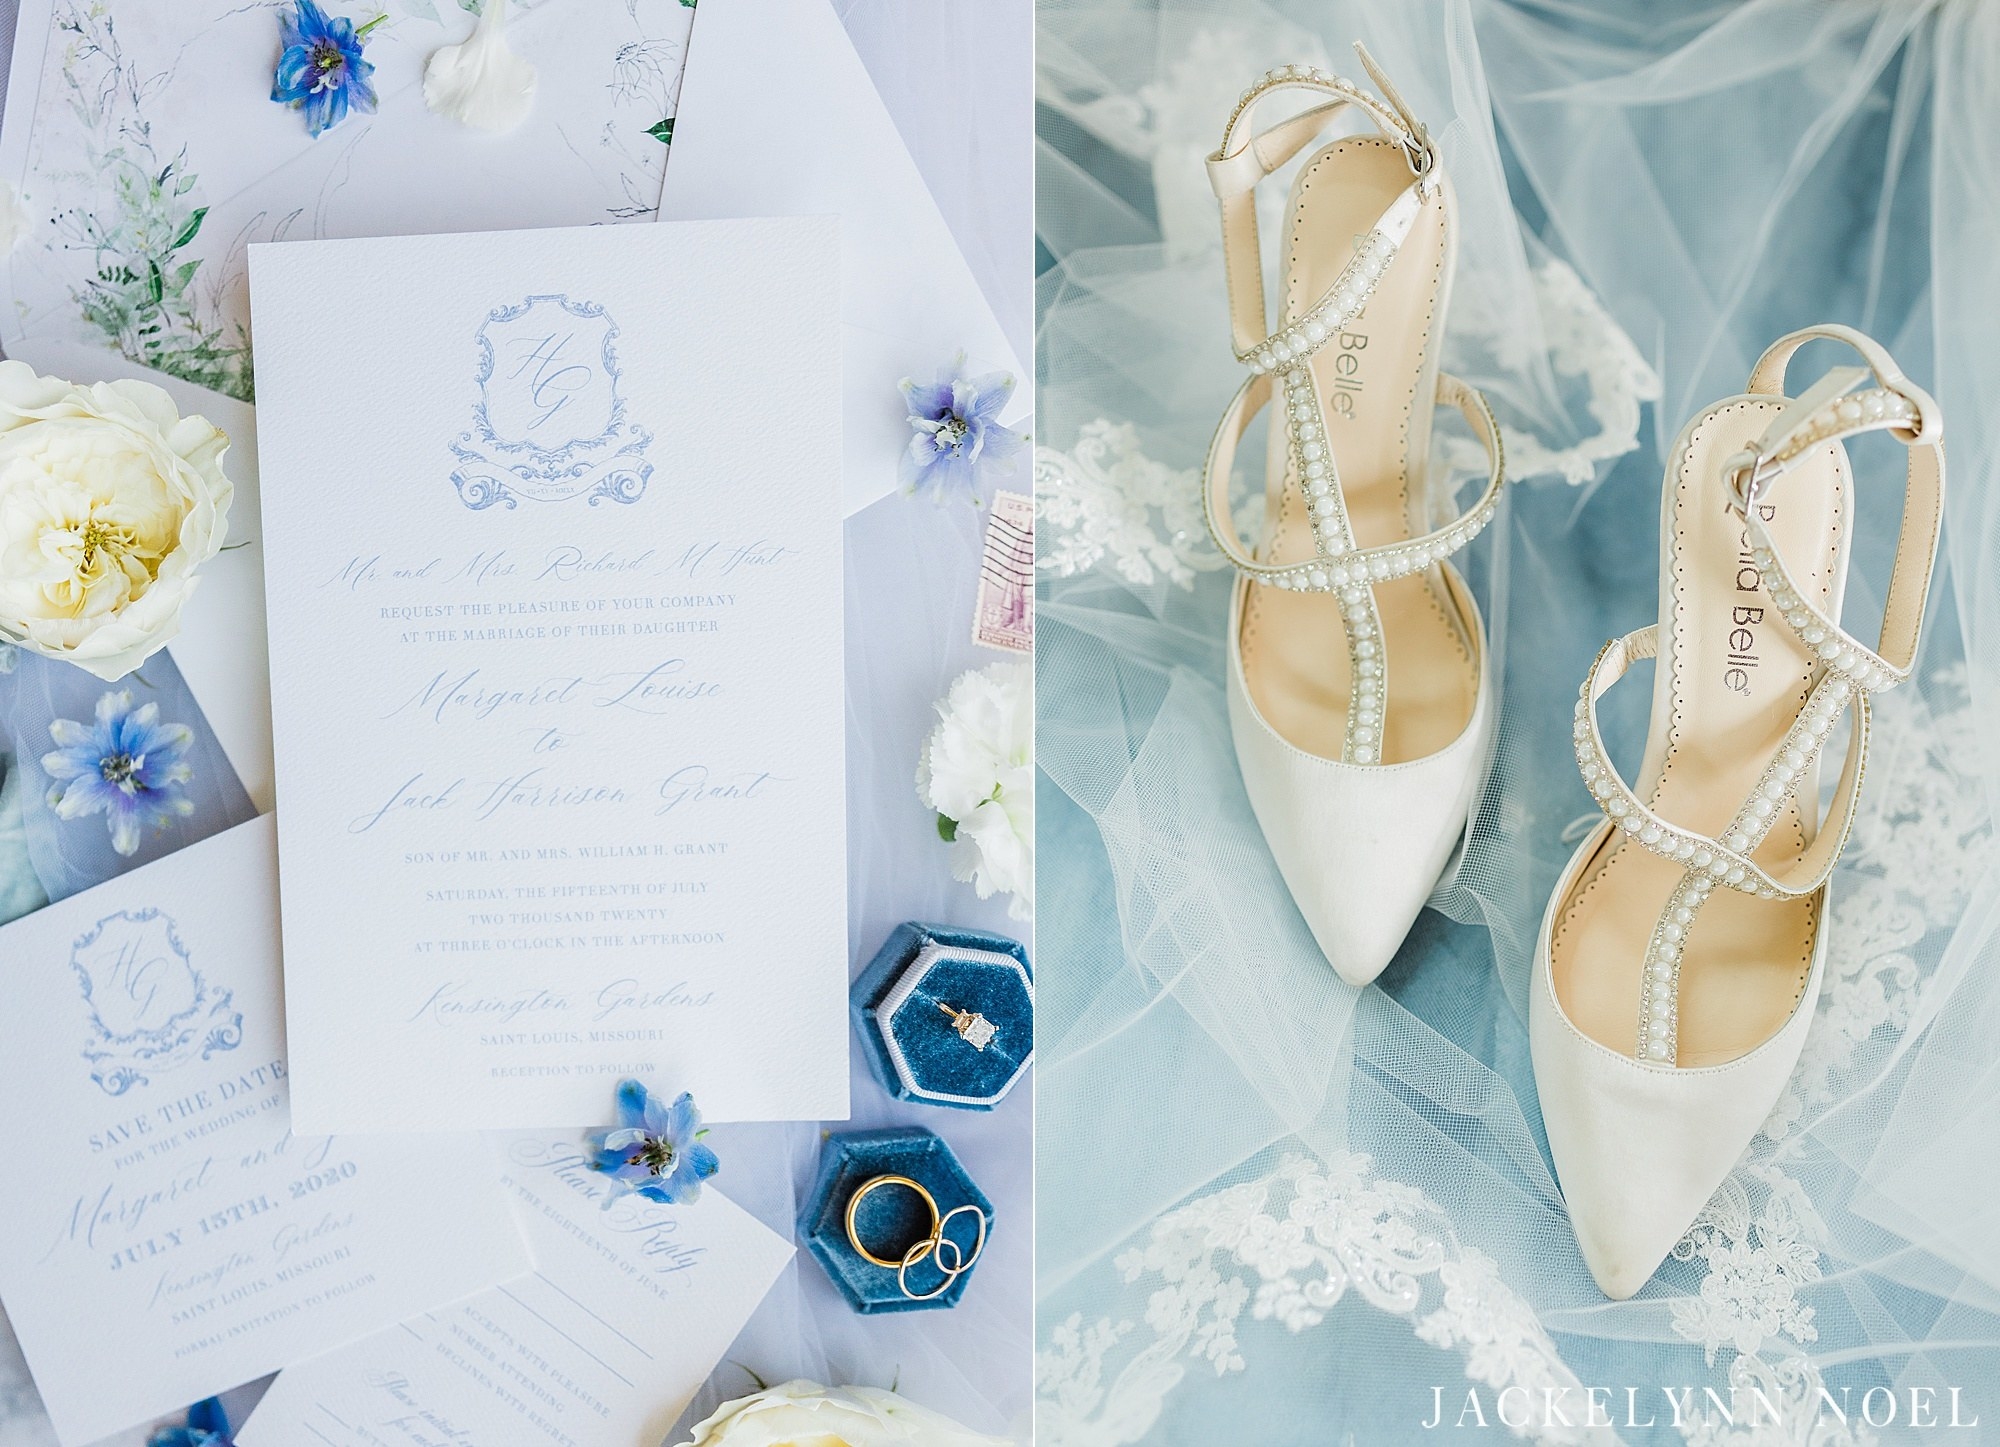 Invitation suite, ring boxes, rings, flowers, shoes, and veil... some of the things to set aside for your wedding detail photos